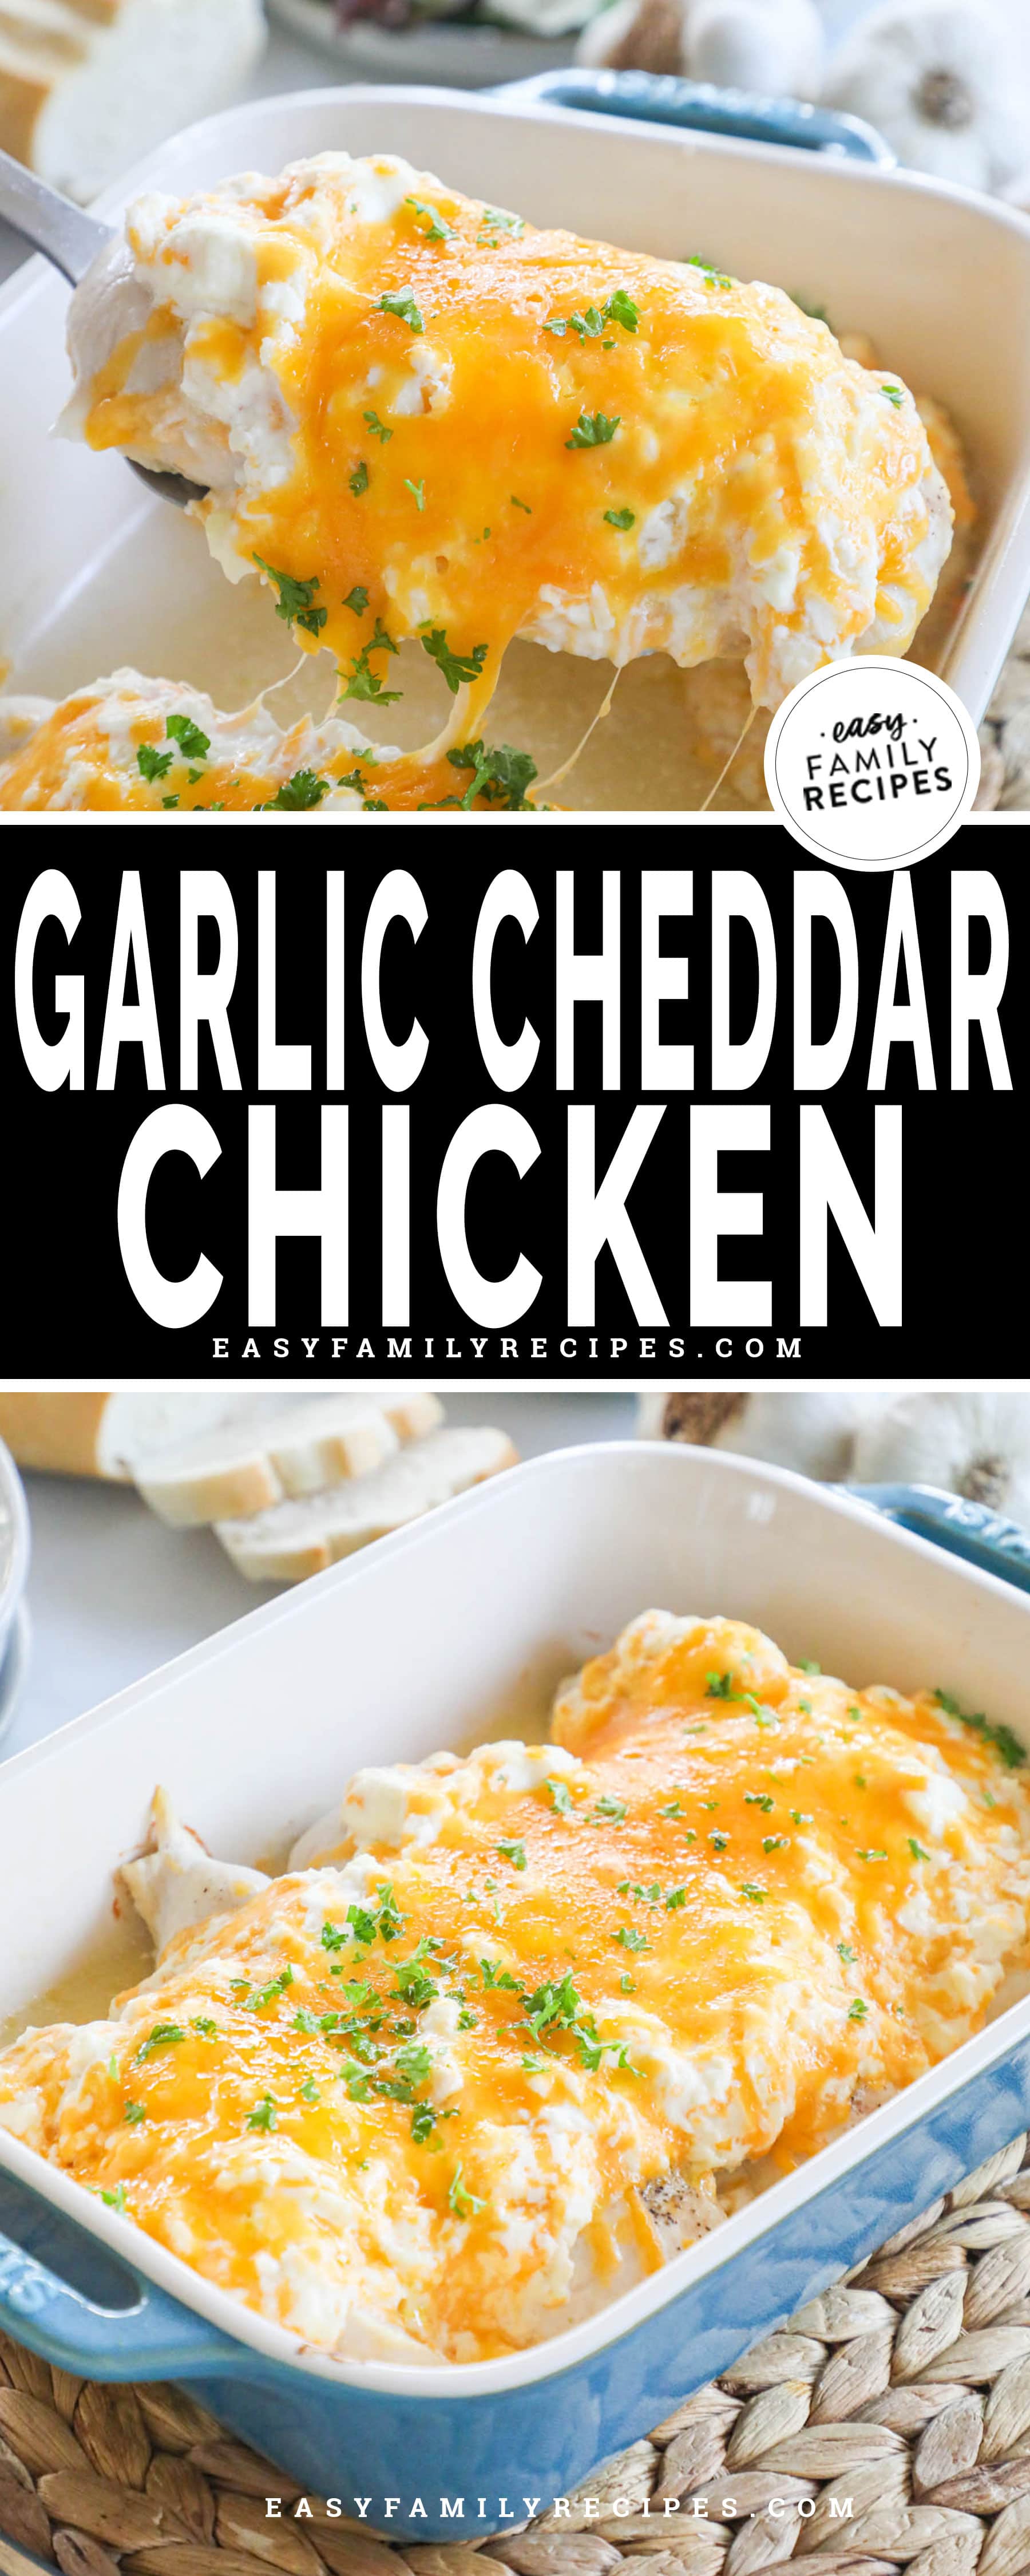 baked chicken breasts with a garlic cheddar topping in a casserole dish